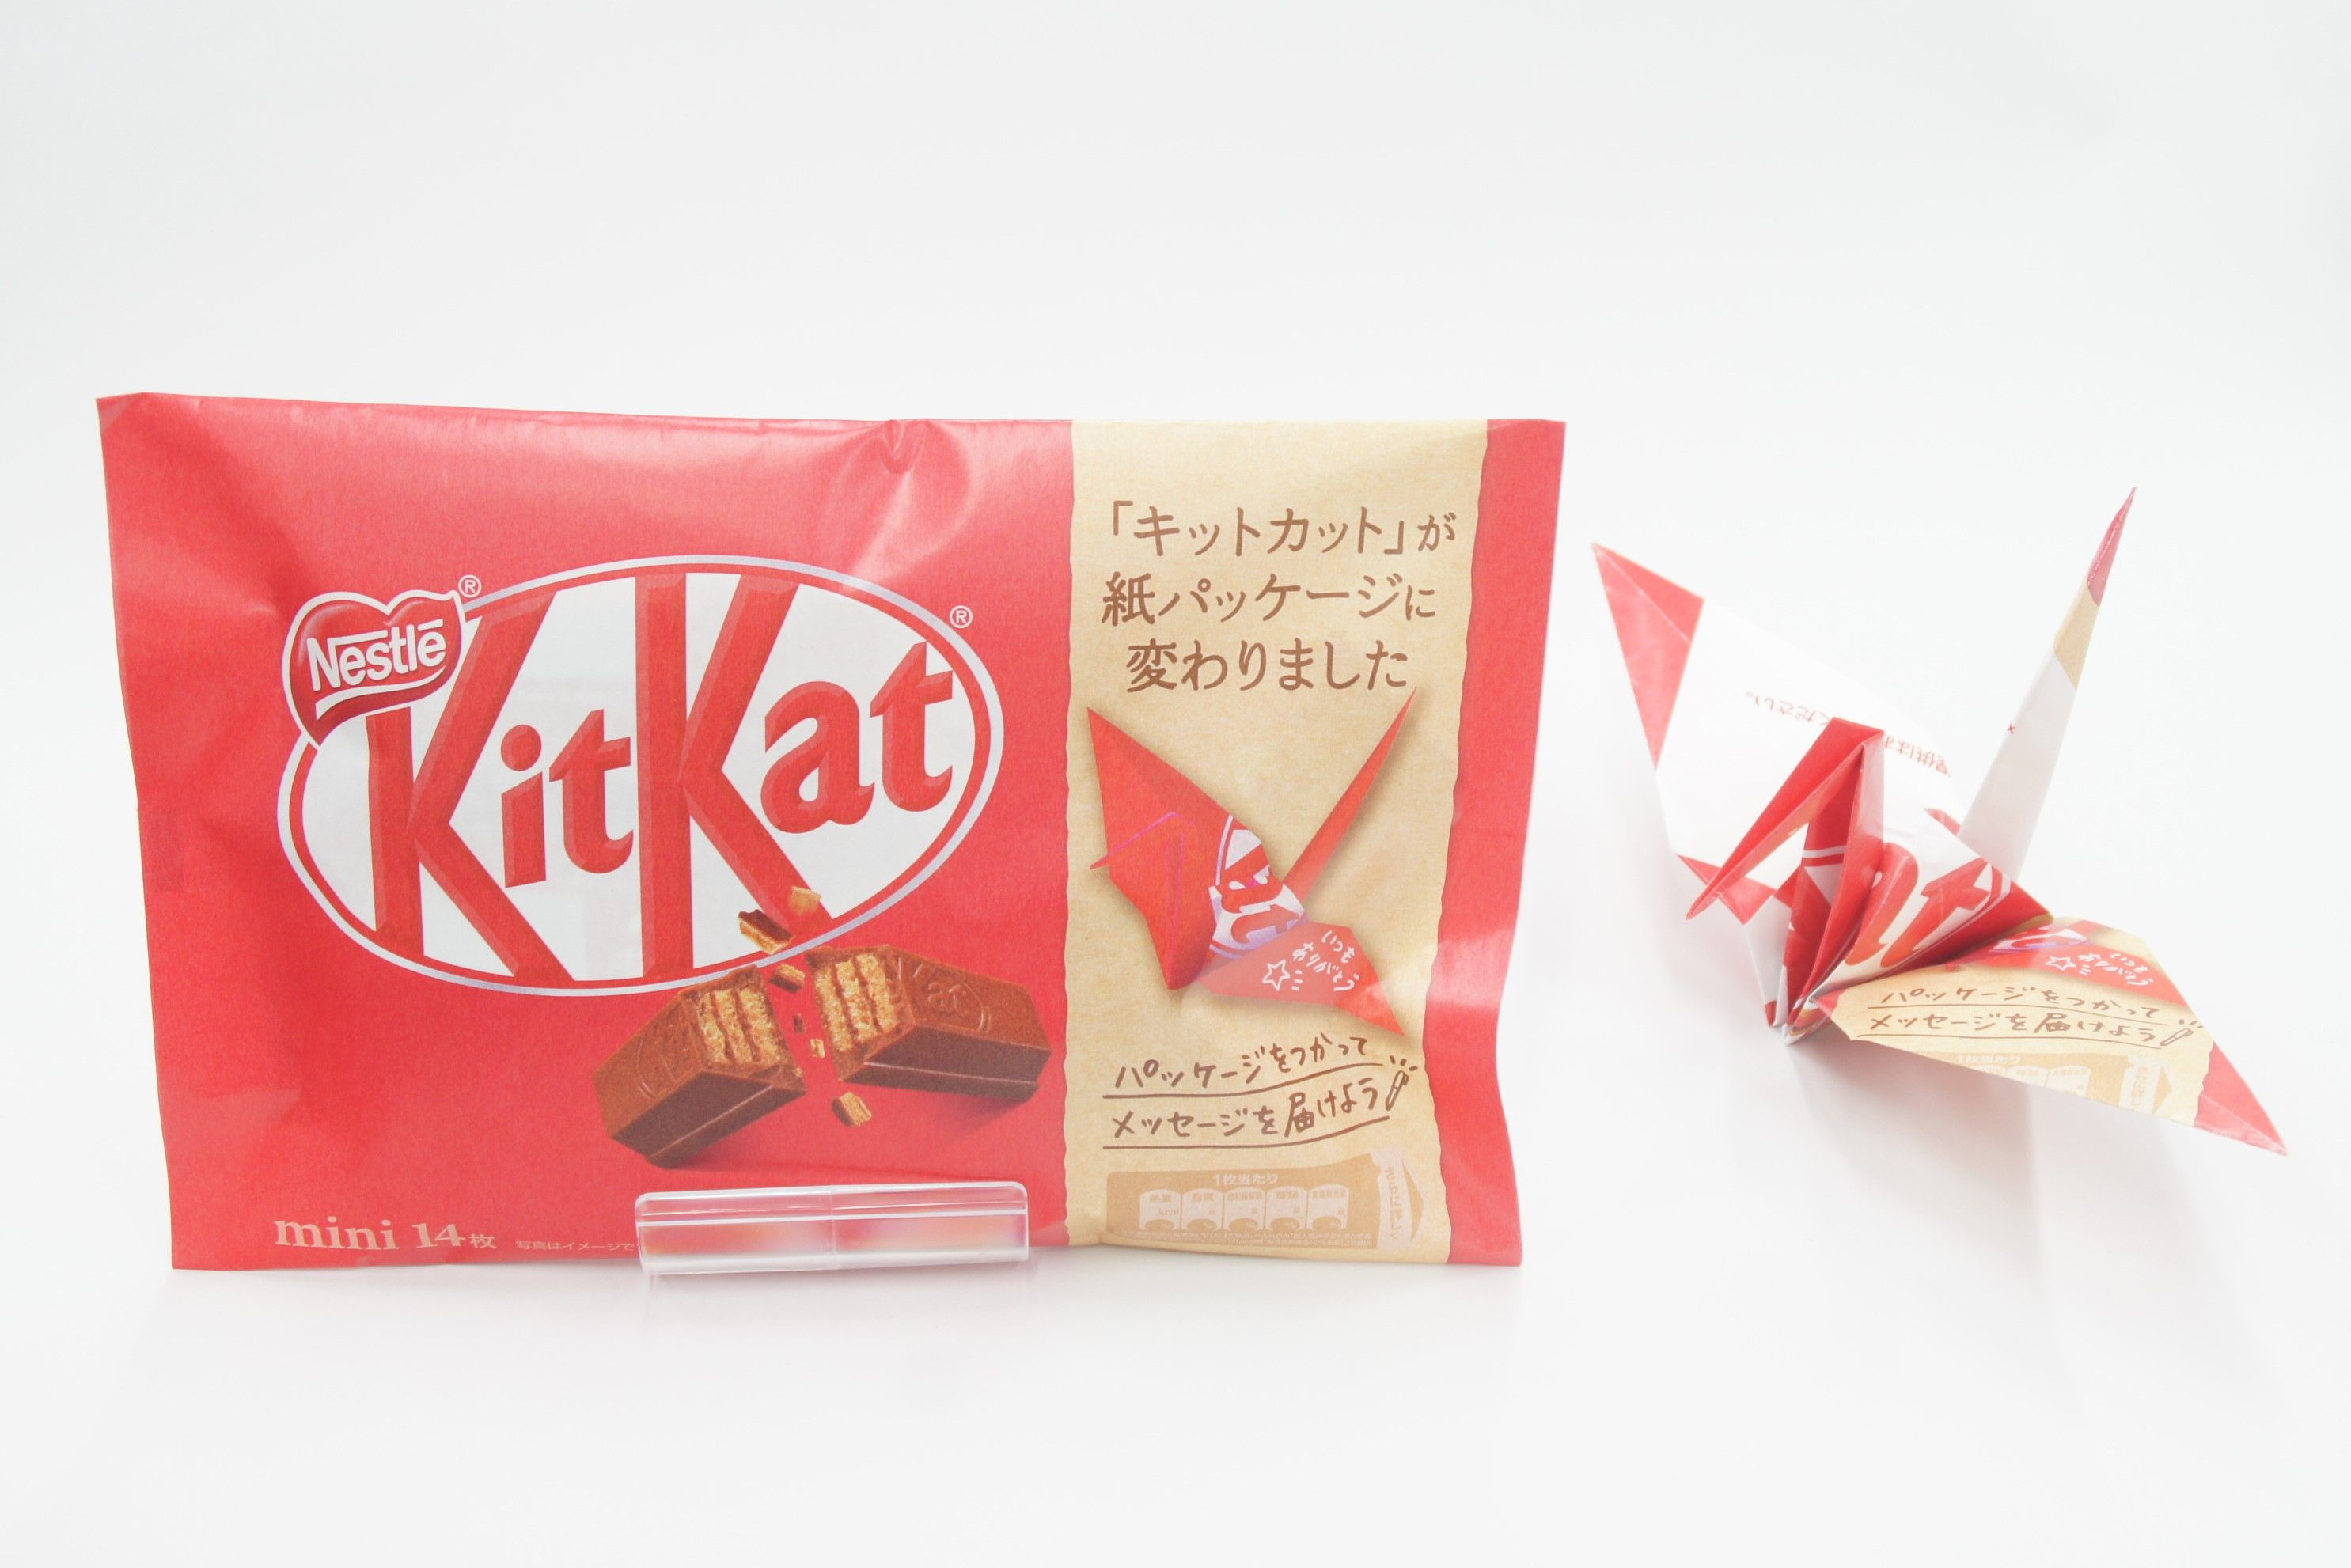 Gum Wrapper Origami Crane Nestl Japan Is Selling Kitkats Wrapped In Origami Paper